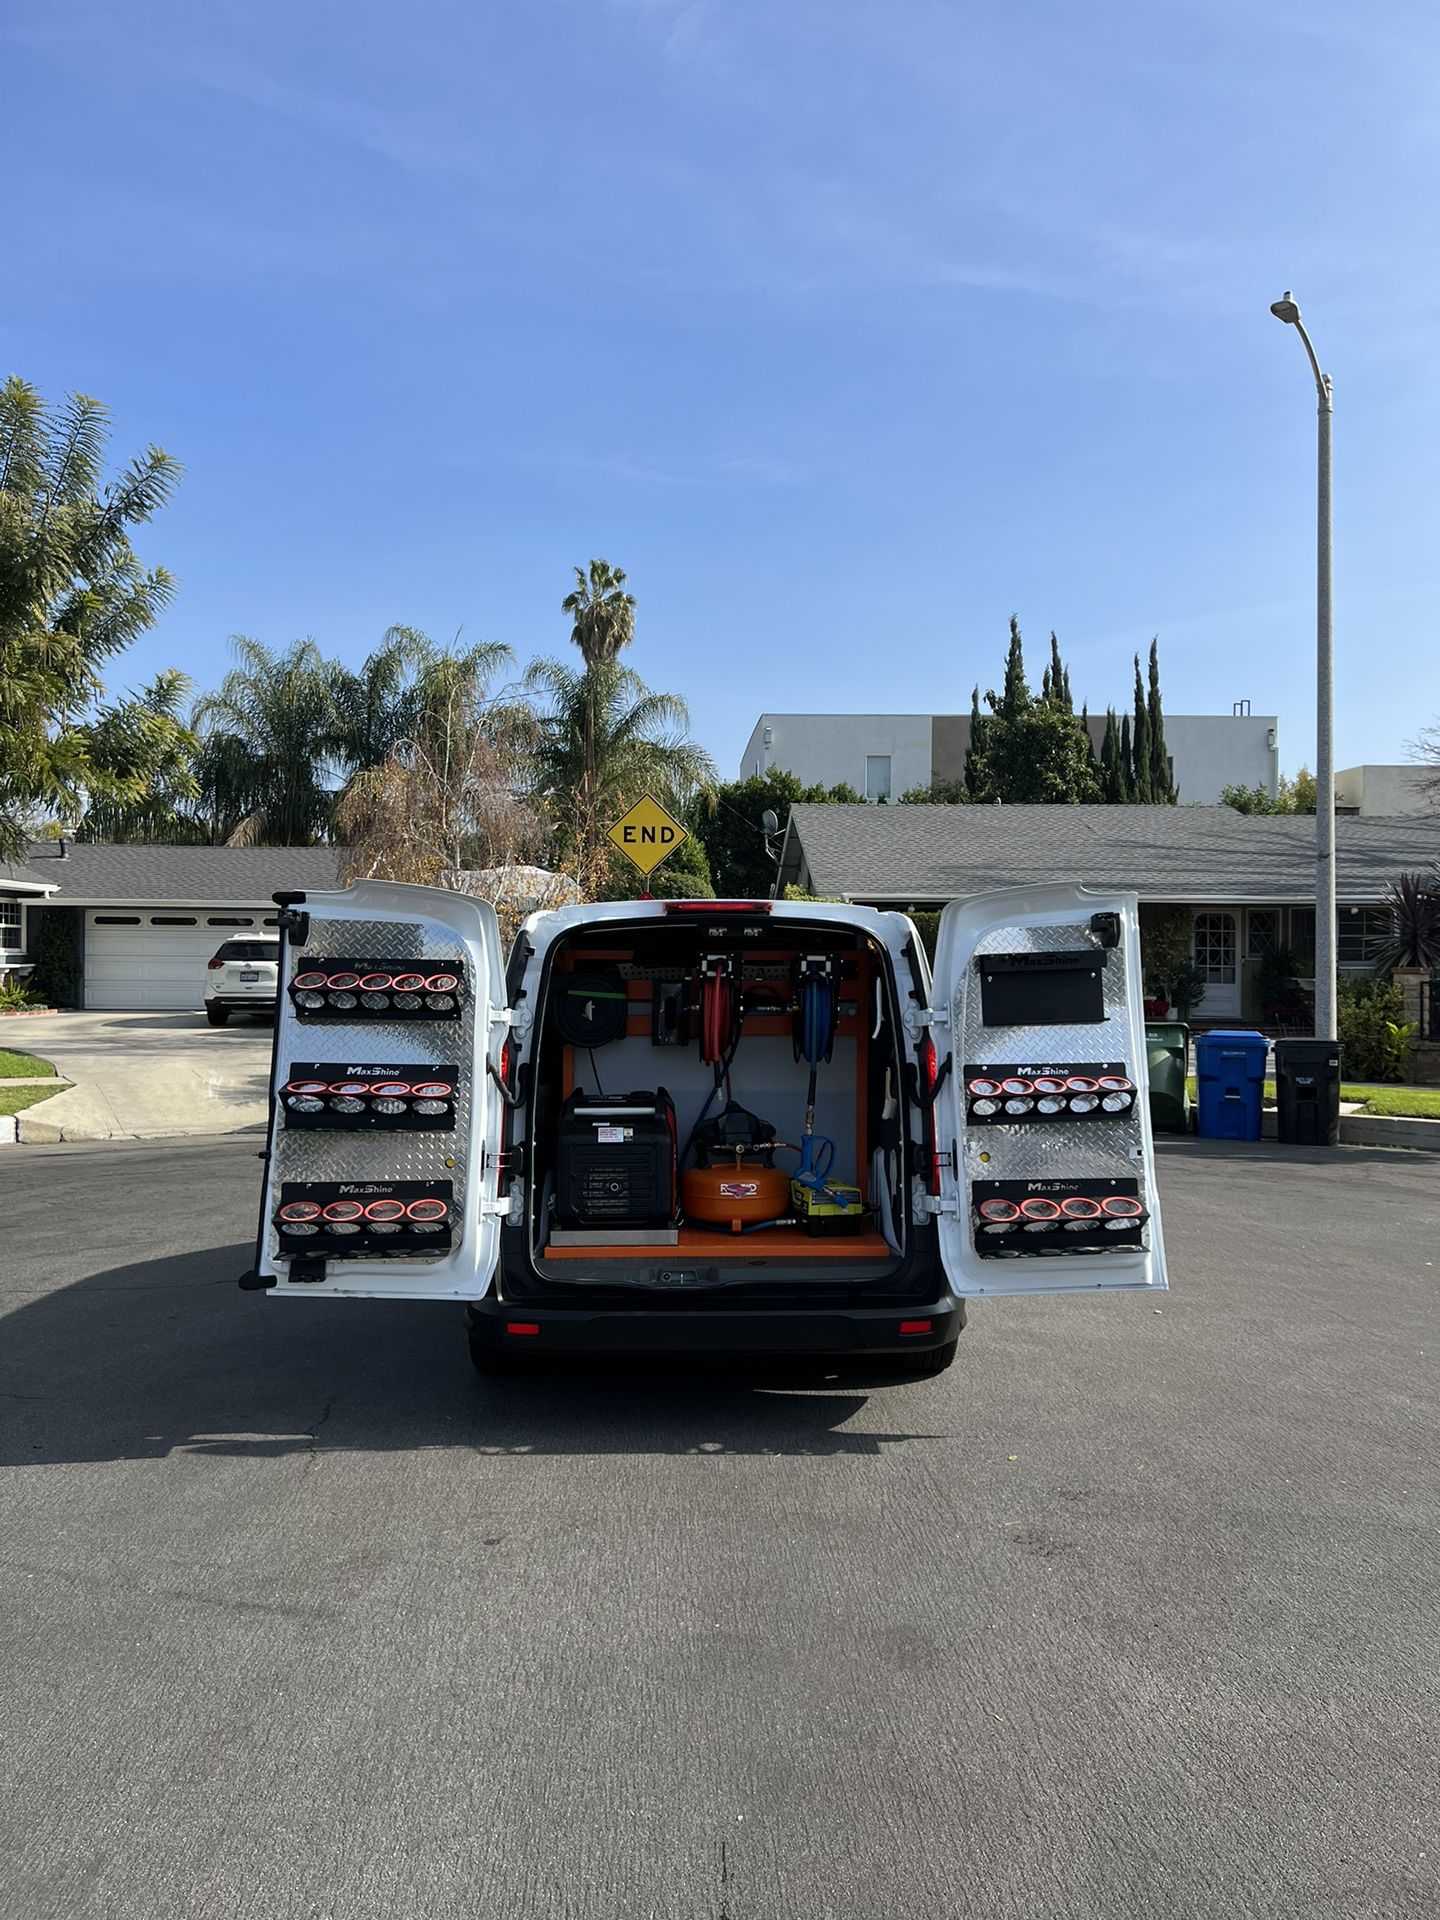 2023 ford transit for Sale in Los Angeles, CA - OfferUp